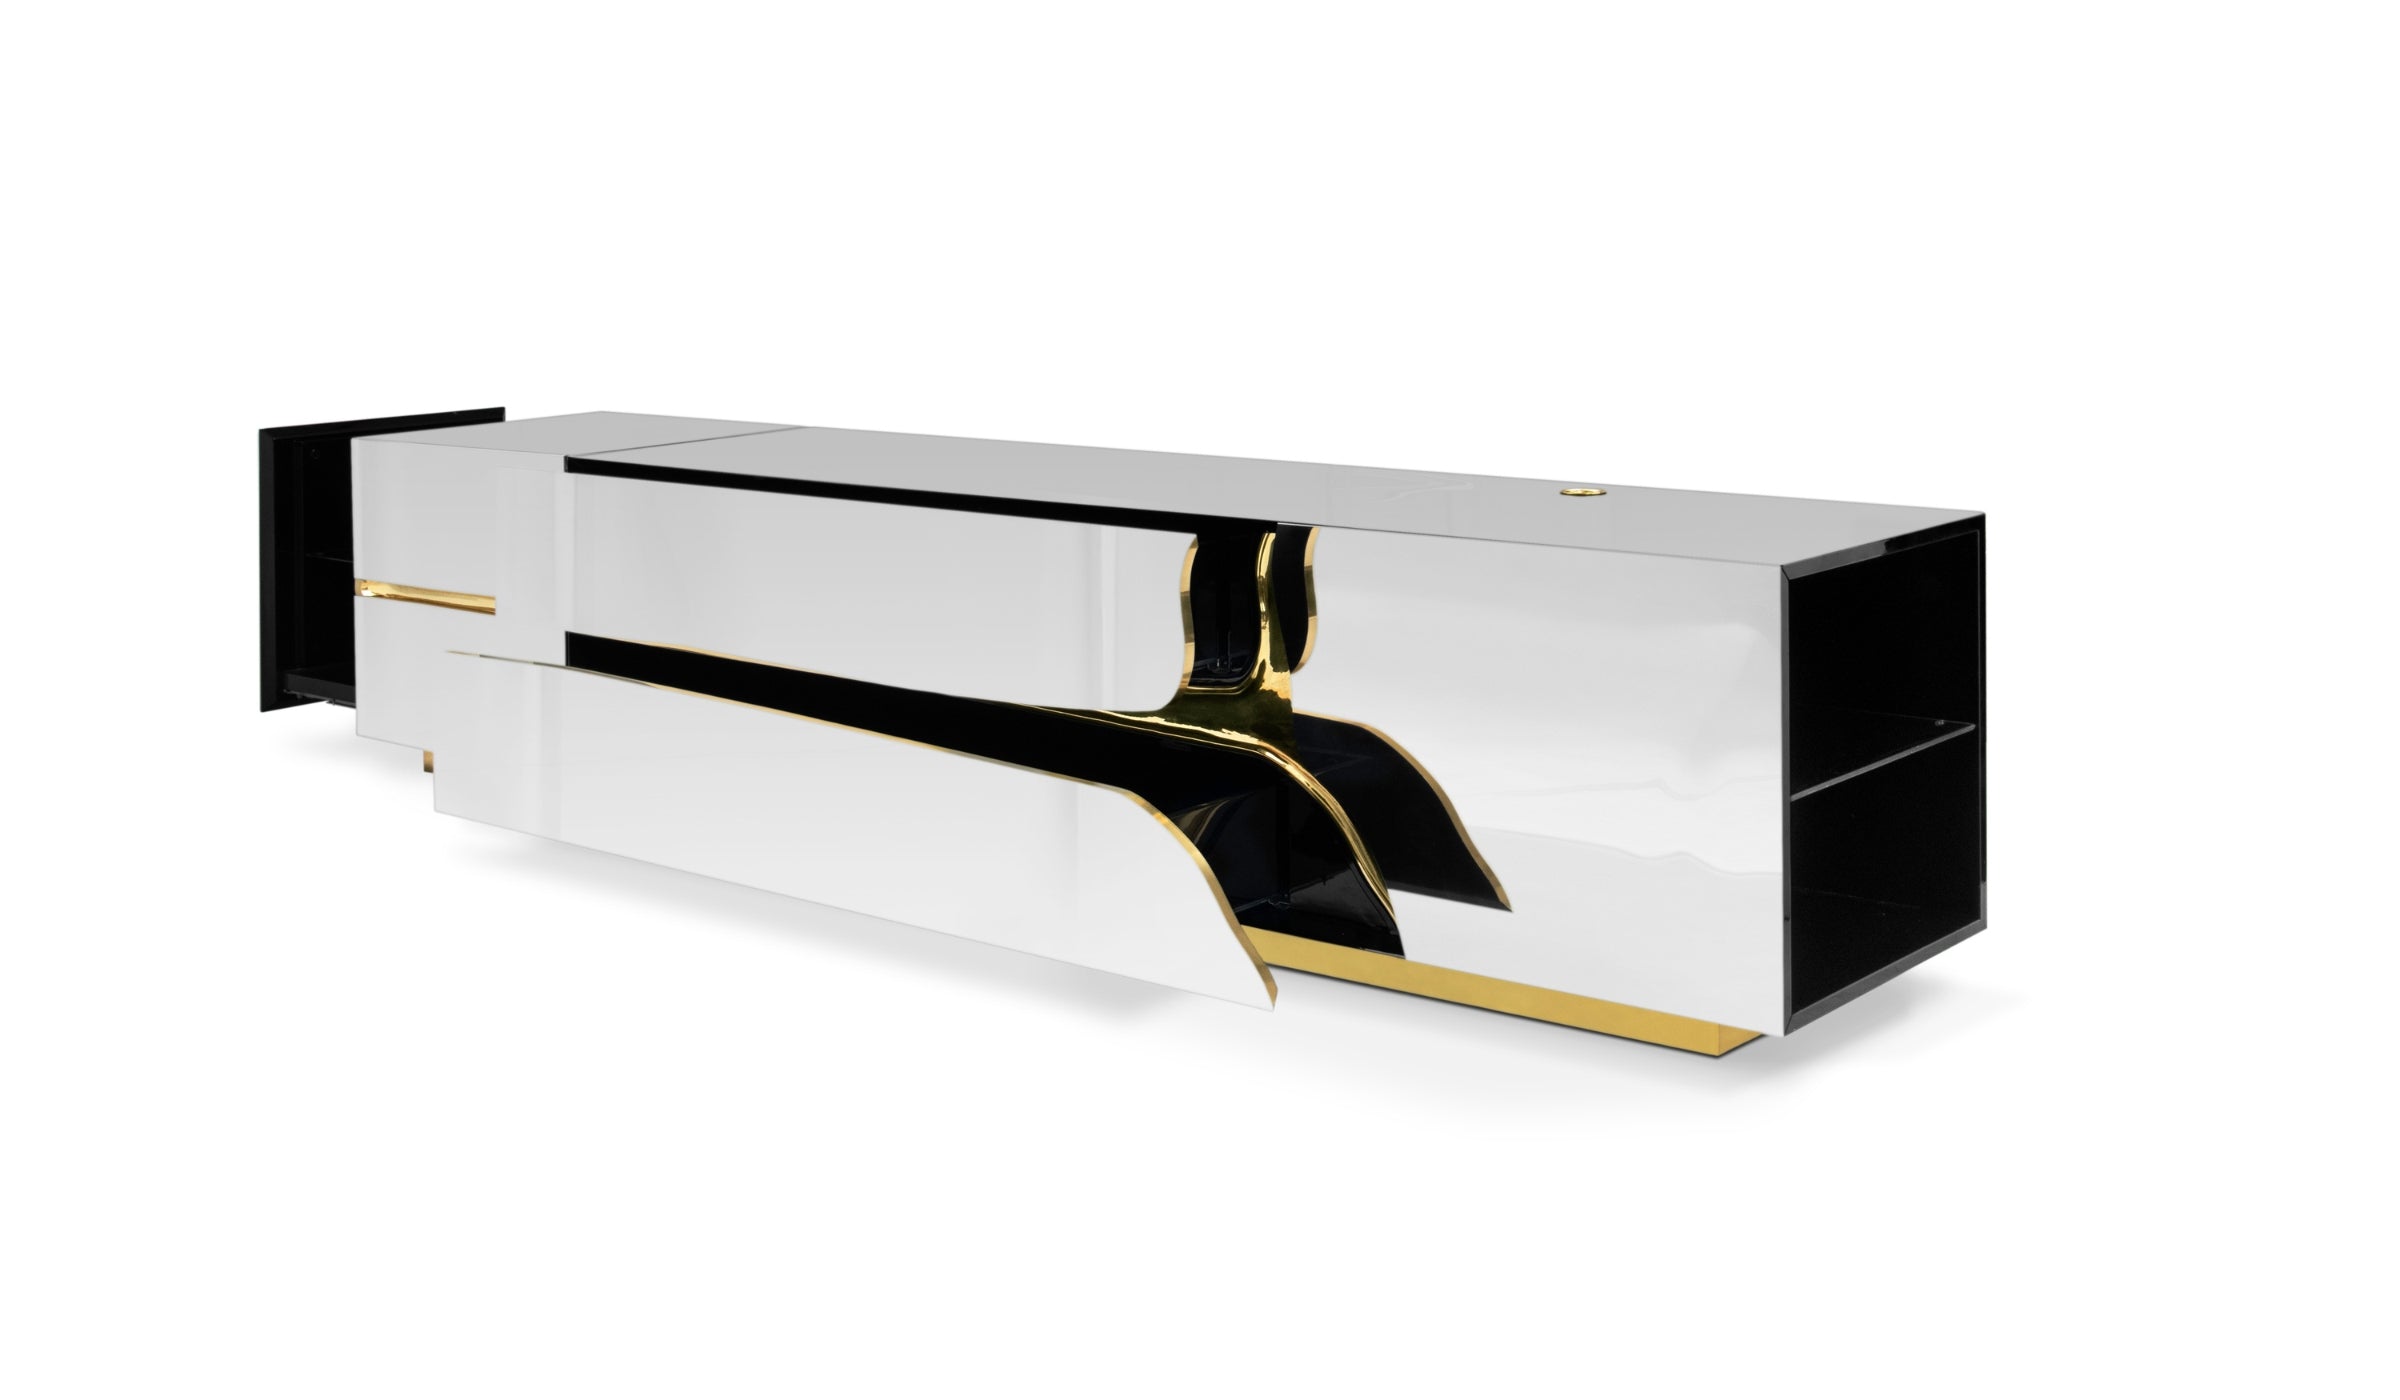 Lapiaz - TV unit in mirrored stainless steel and polished brass